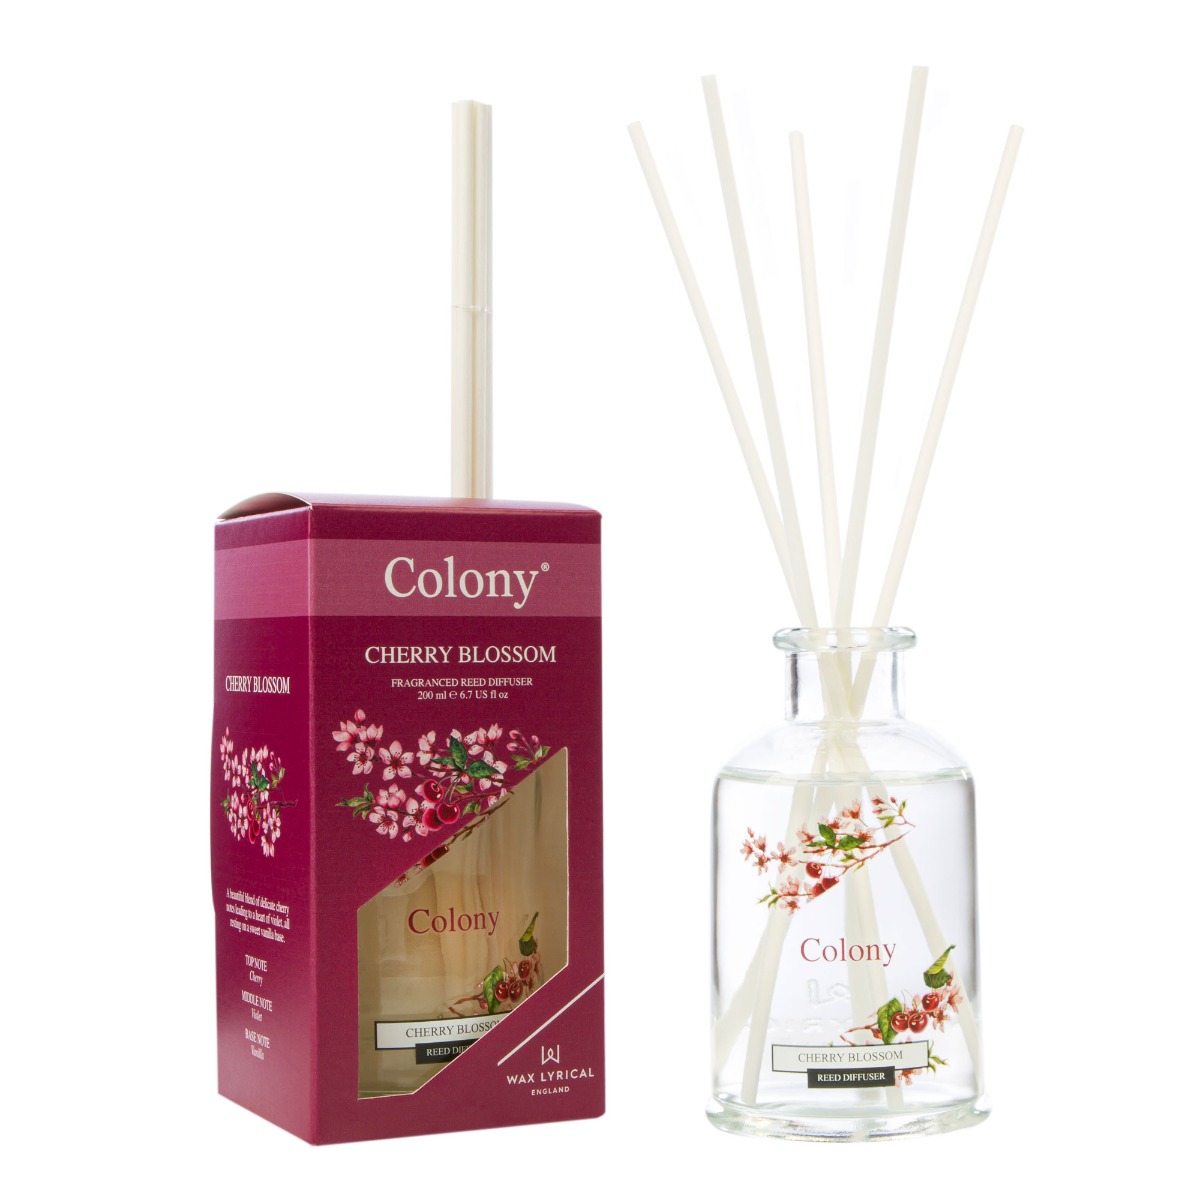 Colony Cherry Blossom Reed Diffuser image number null